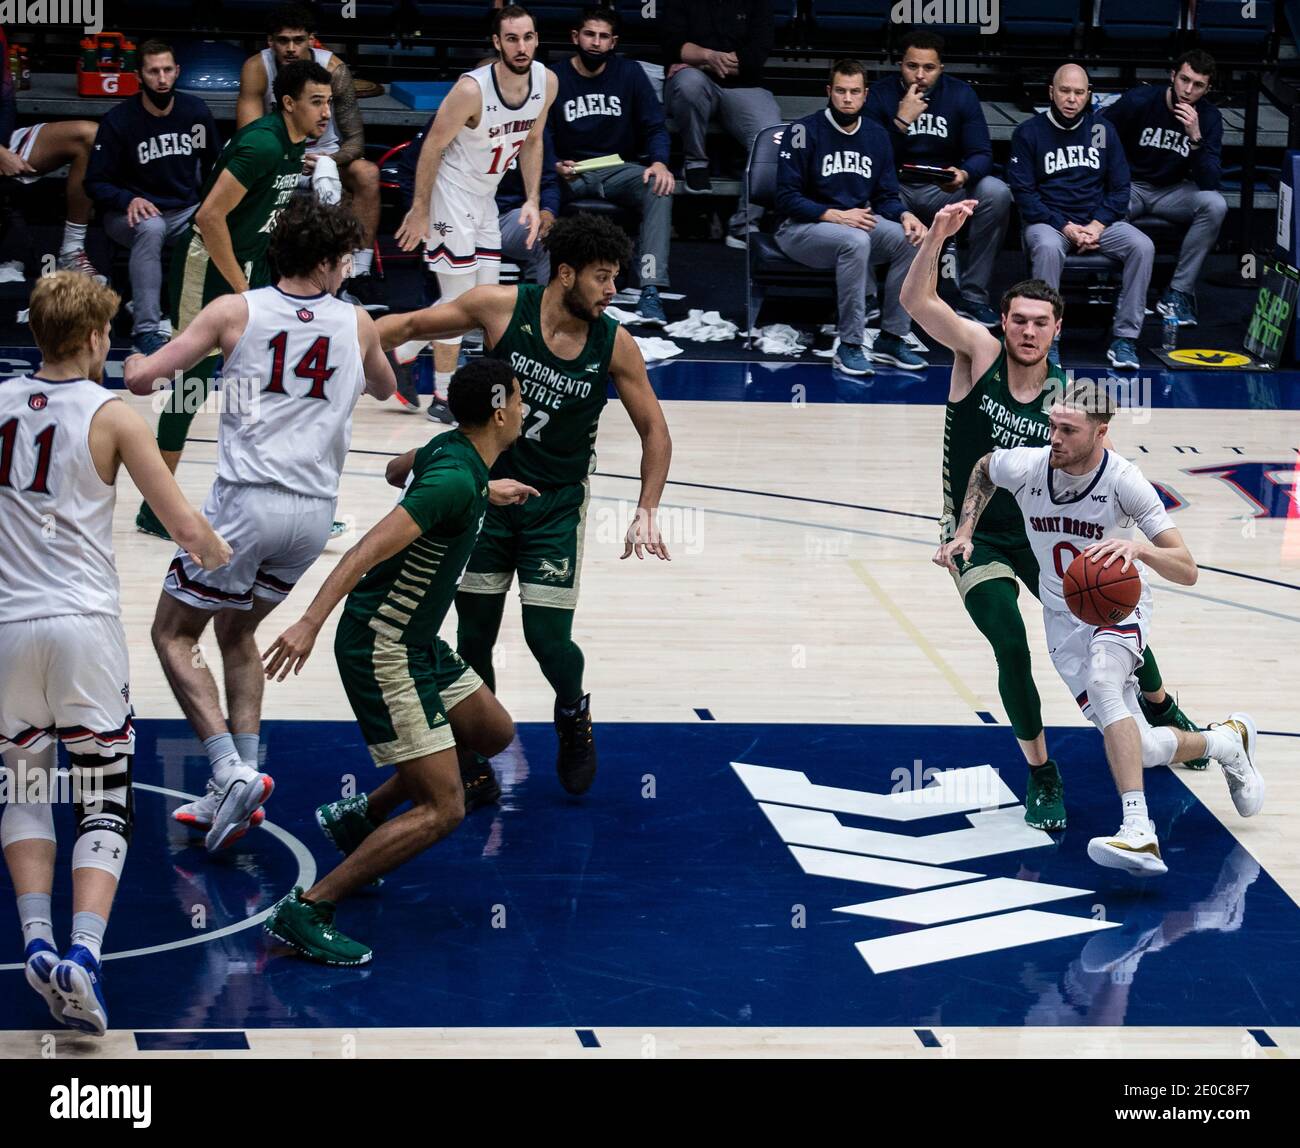 Moraga, CA U.S. 30th Dec, 2020. A. St. Mary's Gaels guard Logan Johnson (0) drives to the hoop during the NCAA Men's Basketball game between Sacramento State Hornets and the Saint Mary's Gaels 63-45 win at McKeon Pavilion Moraga Calif. Thurman James/CSM/Alamy Live News Stock Photo